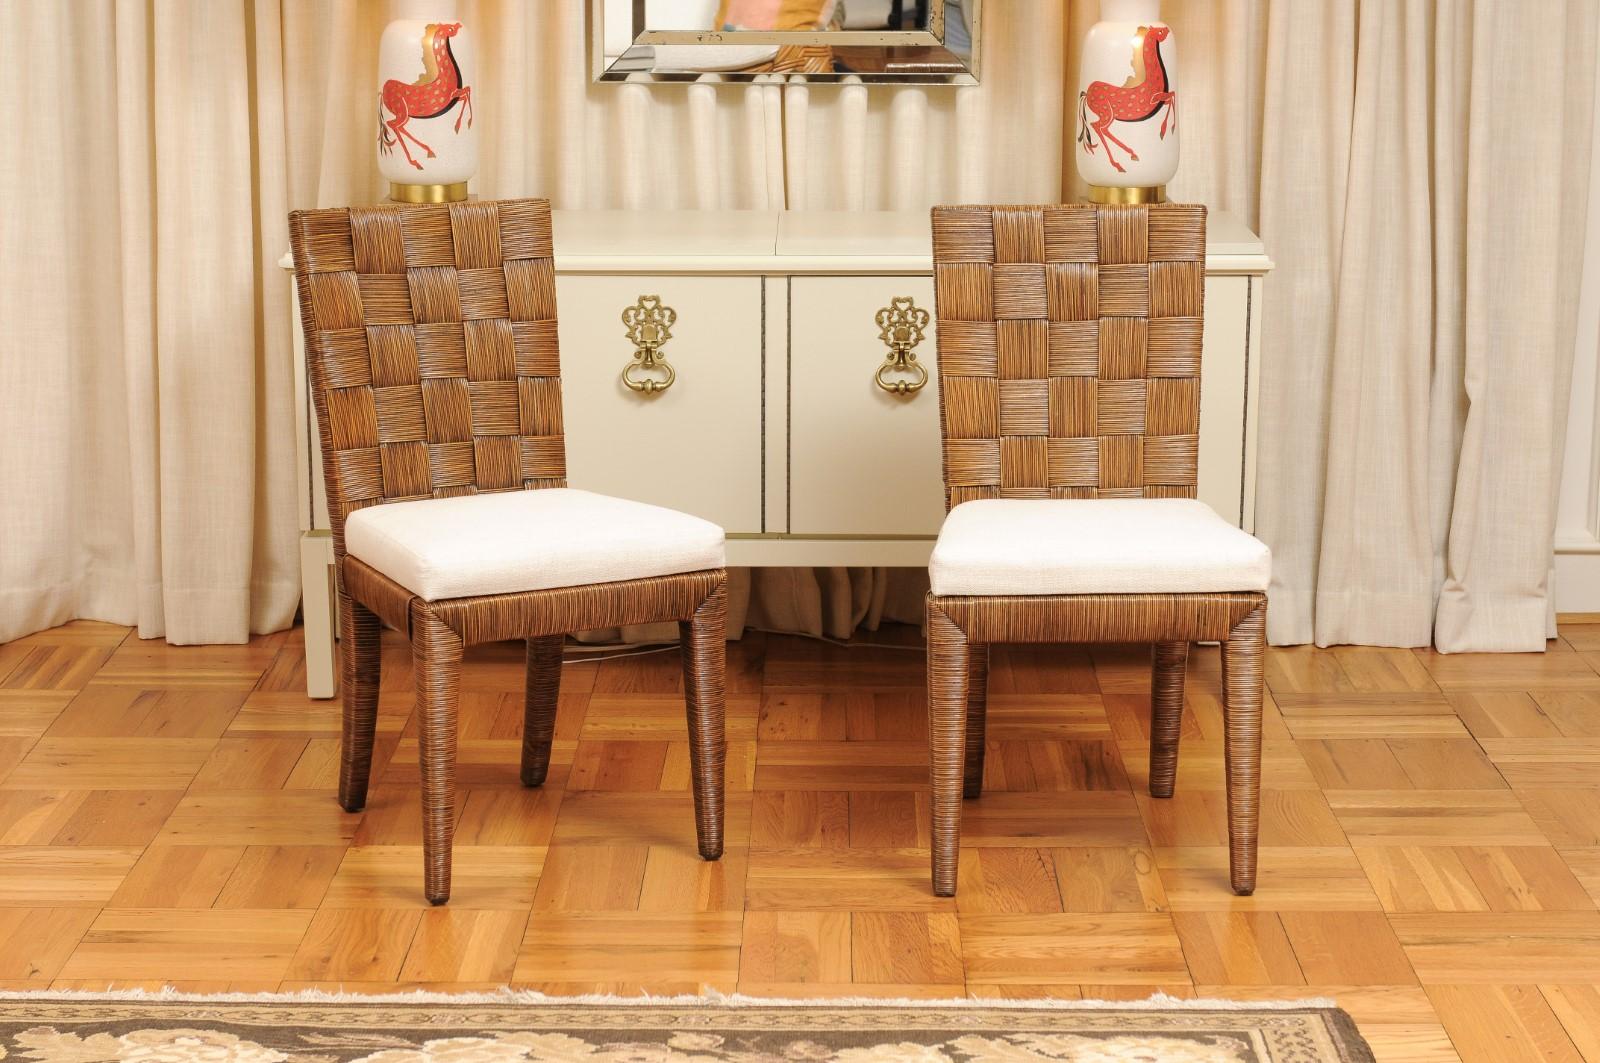 This magnificent large set of organic dining chairs is Unique on the World market. The set is shipped as professionally photographed and described in the listing narrative: Meticulously professionally restored, newly custom upholstered and